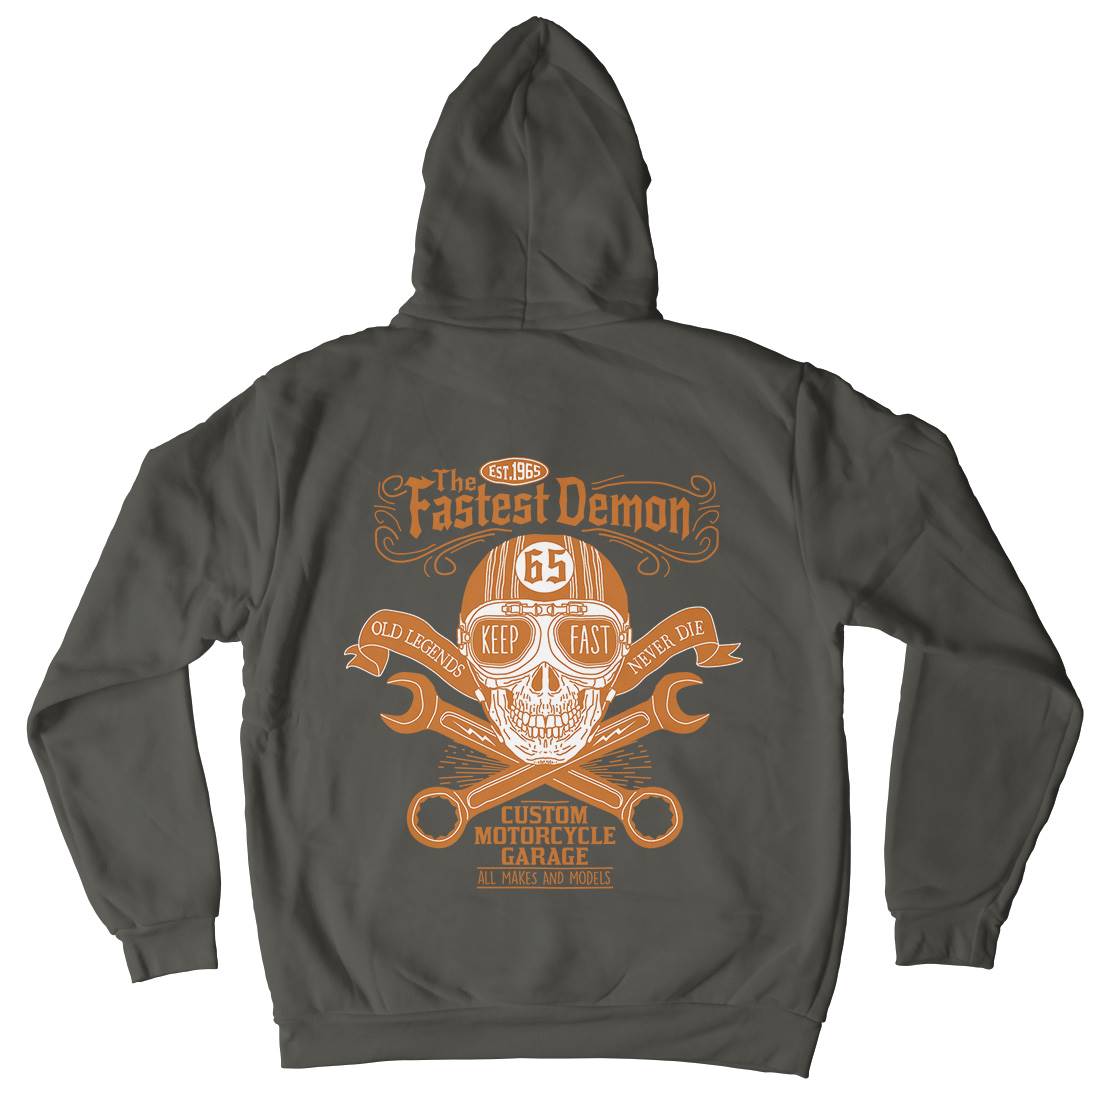 Fastest Demon Mens Hoodie With Pocket Motorcycles A993